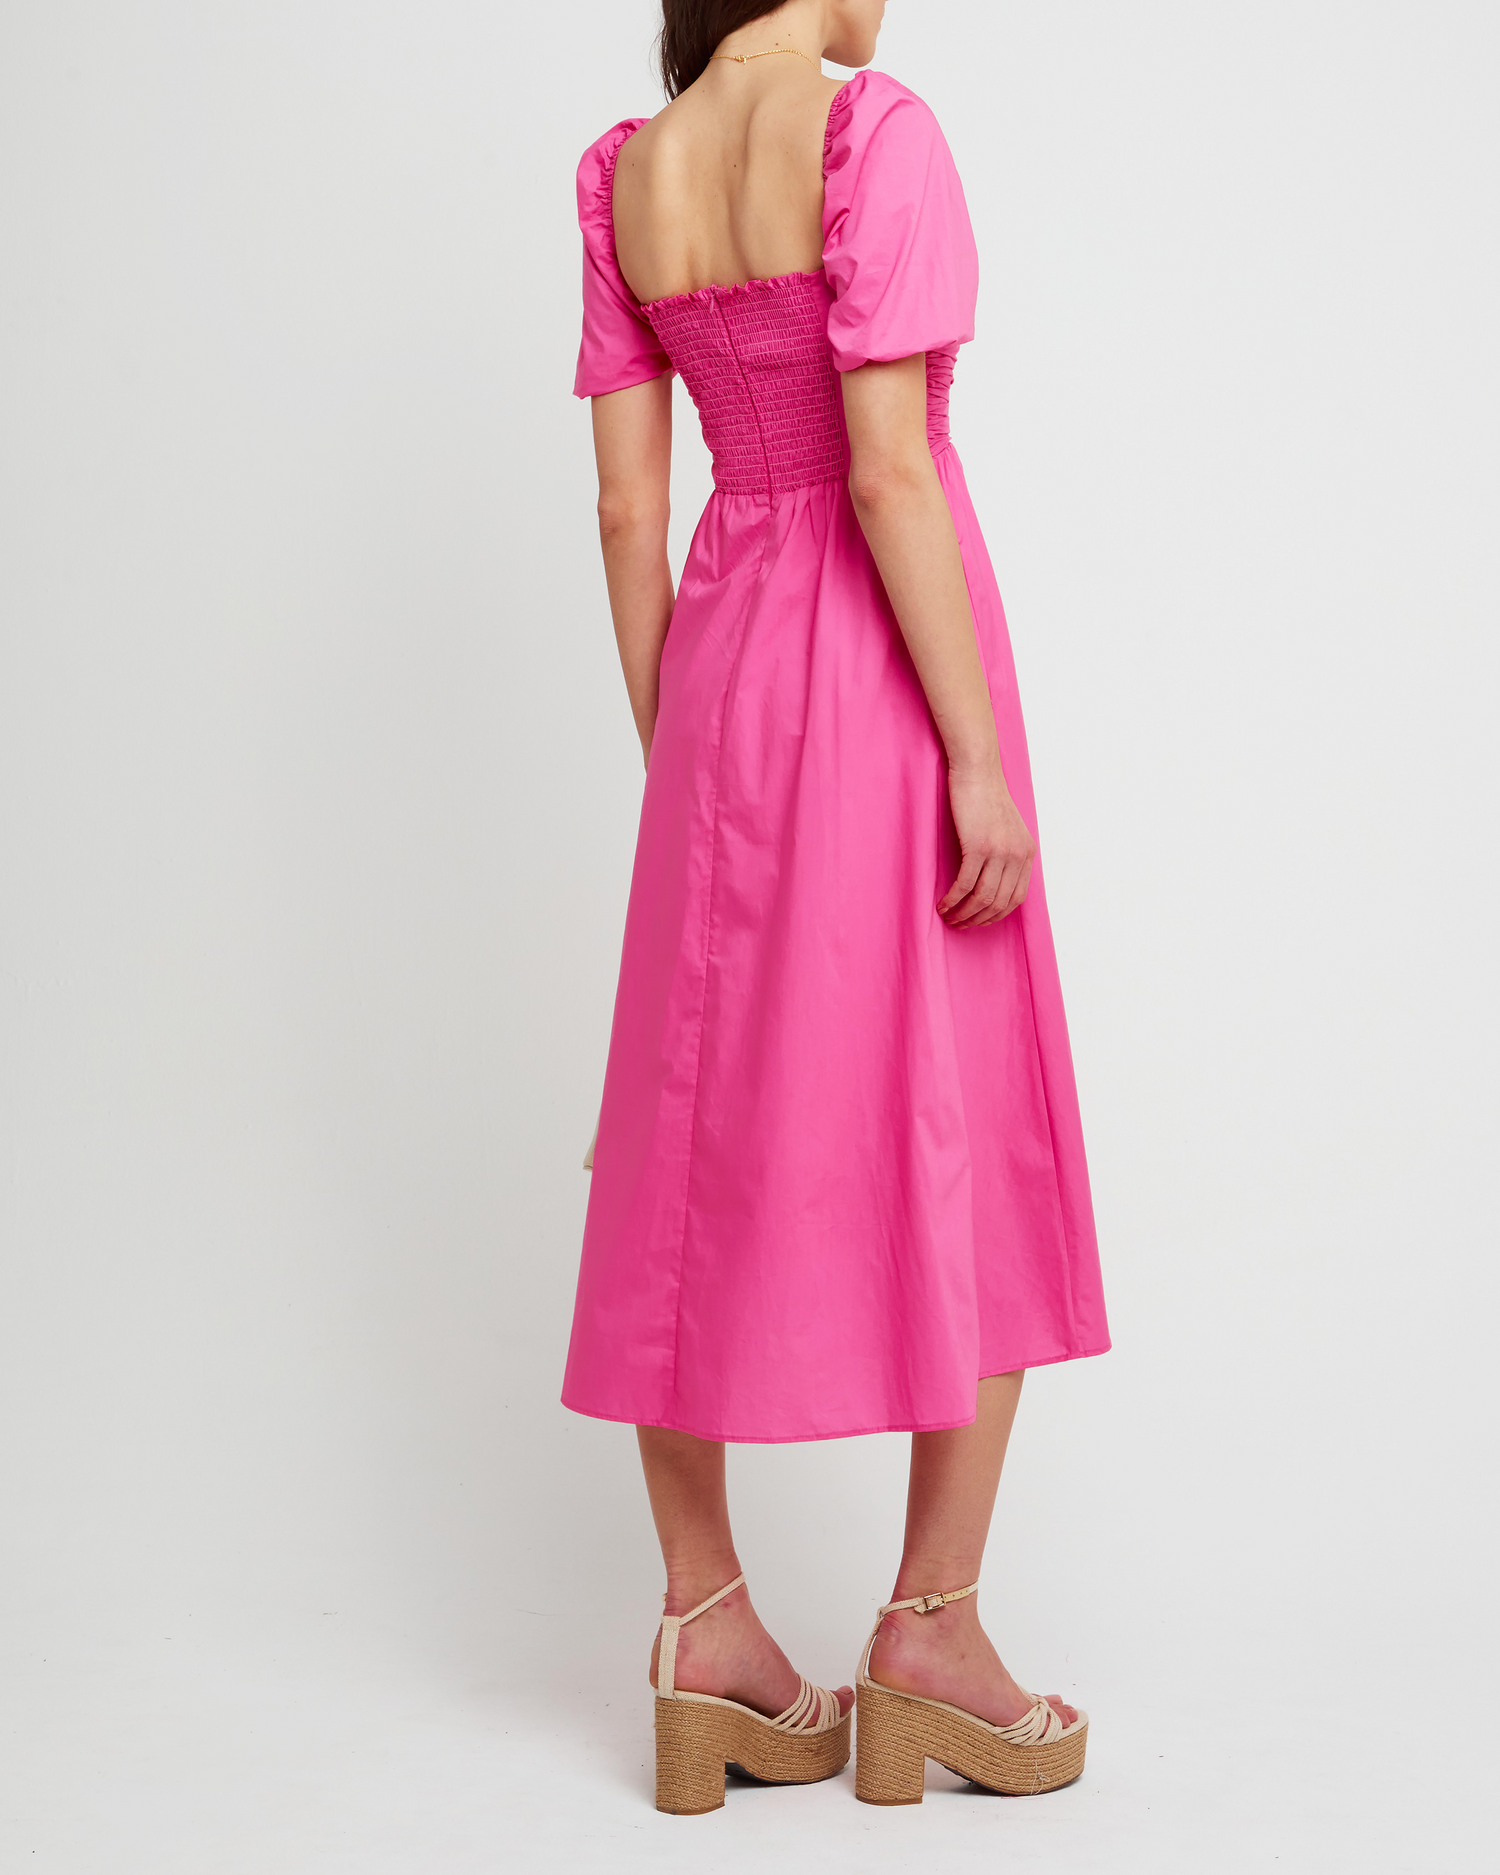 Second image of River Dress, a pink midi dress, square neckline, short puff sleeves, gathered bodice